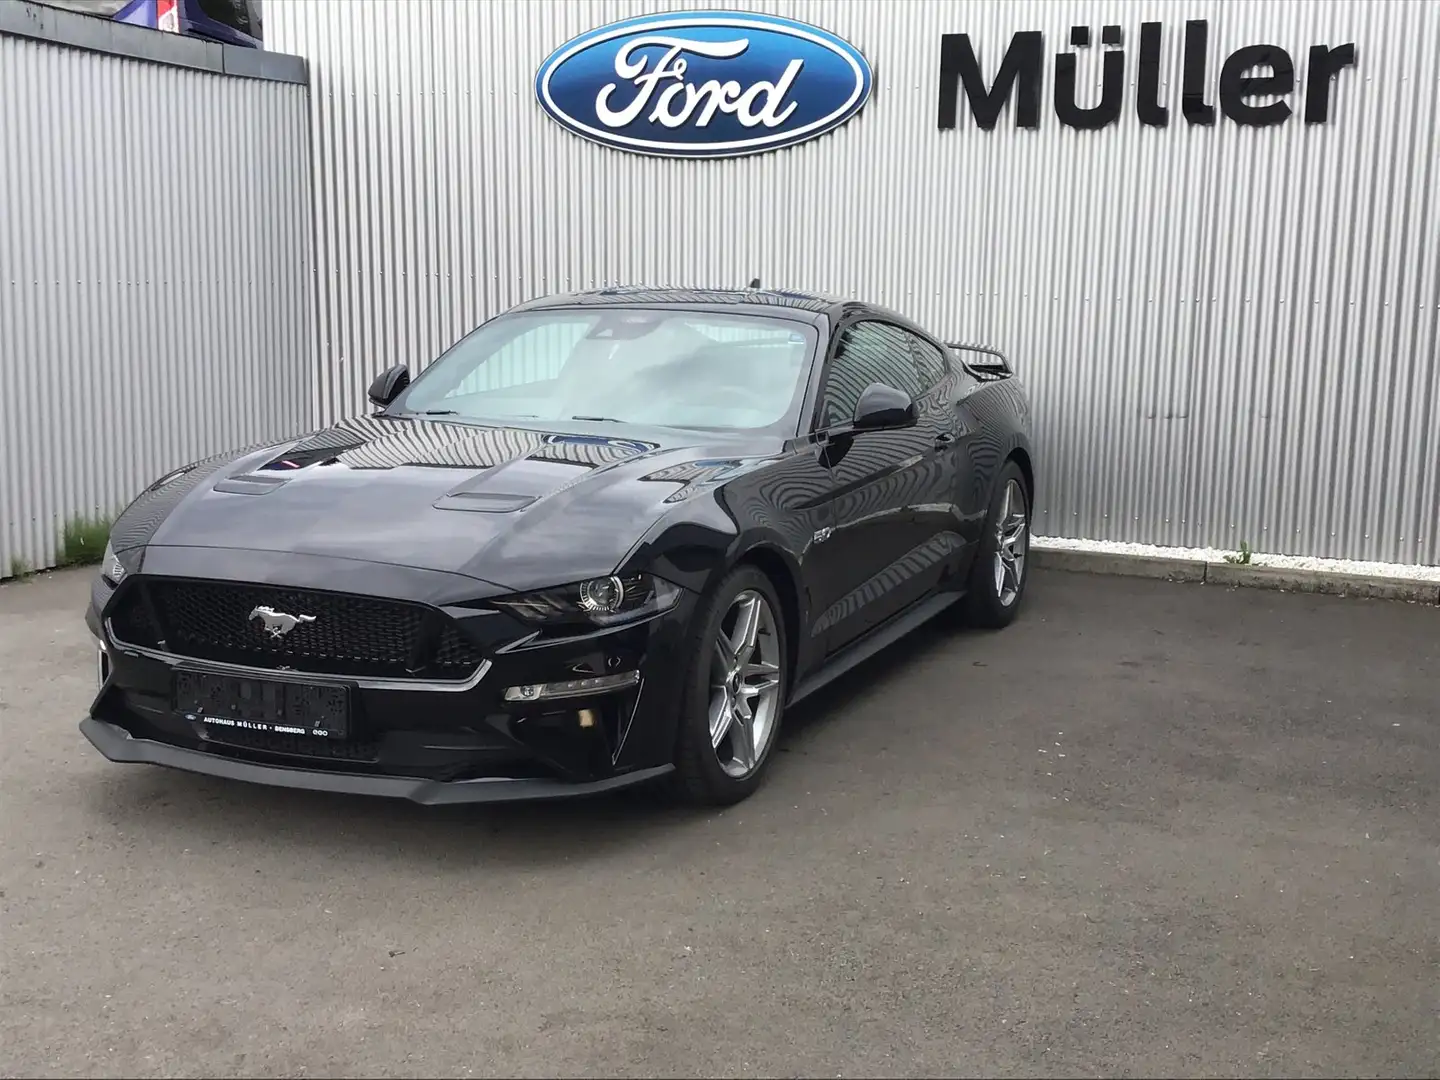 Ford Mustang 5,0 l V8 450PS Automatik Nero - 1